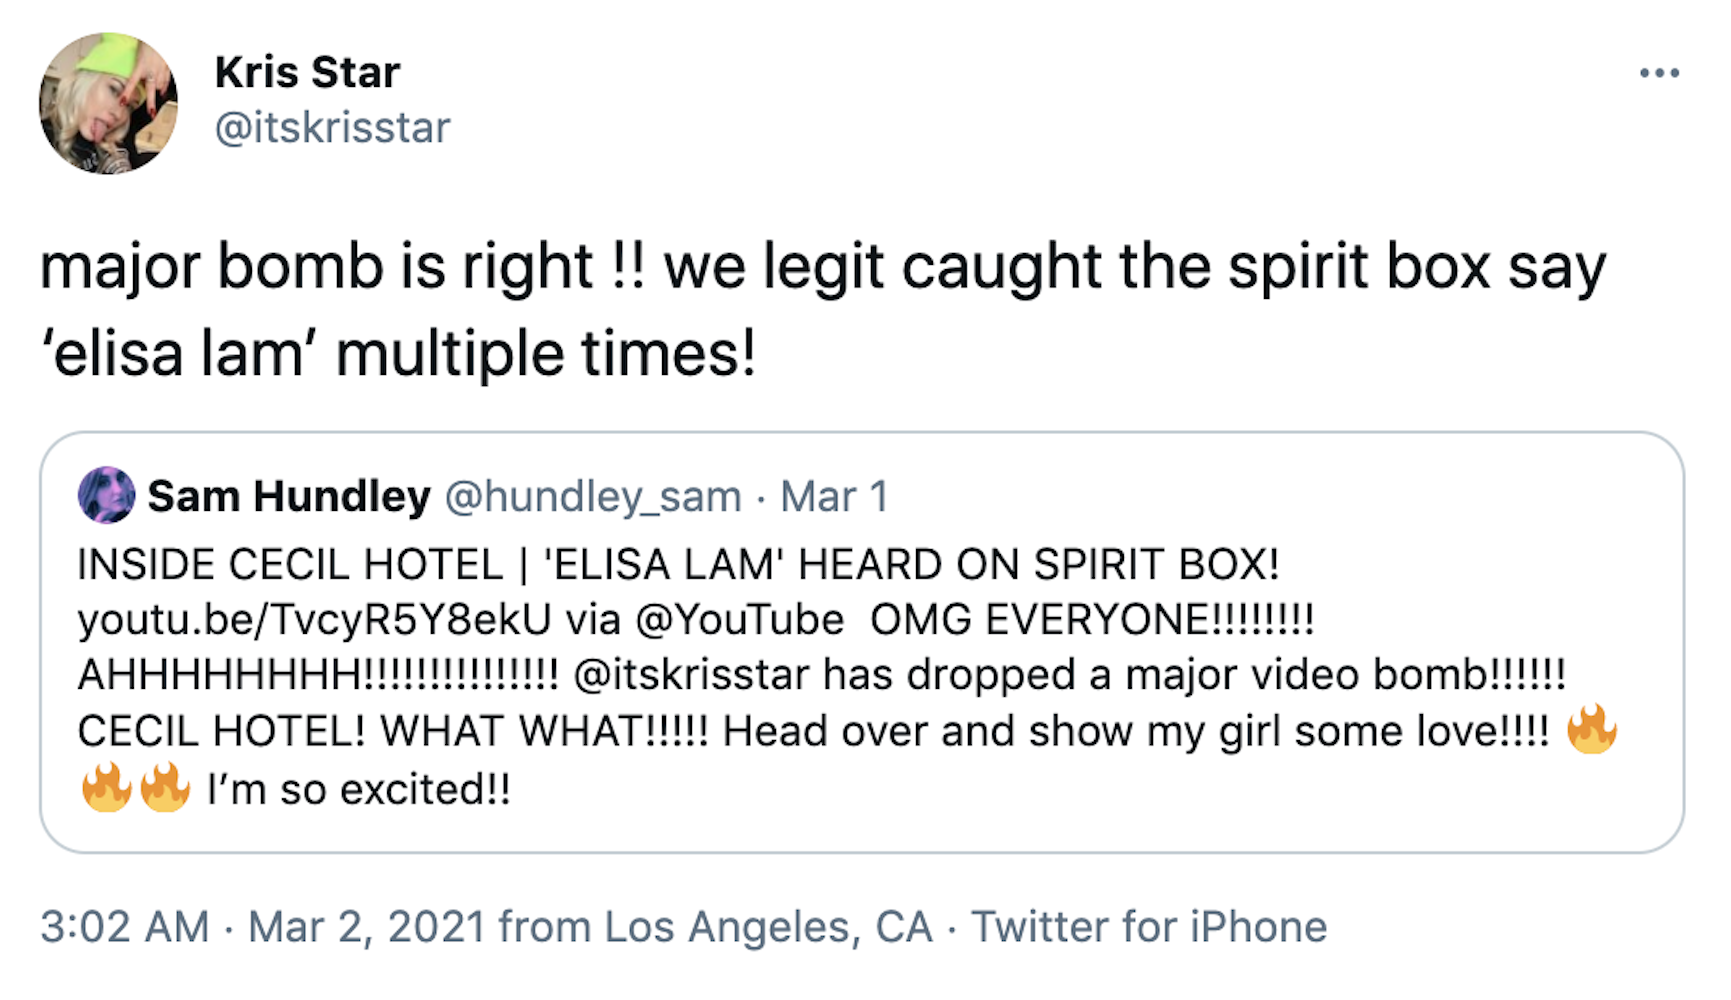 "major bomb is right !! we legit caught the spirit box say ‘elisa lam’ multiple times!" Embedded tweet from @hundley_sam "INSIDE CECIL HOTEL | 'ELISA LAM' HEARD ON SPIRIT BOX! https://youtu.be/TvcyR5Y8ekU via  @YouTube   OMG EVERYONE!!!!!!!! AHHHHHHHH!!!!!!!!!!!!!!!  @itskrisstar  has dropped a major video bomb!!!!!! CECIL HOTEL! WHAT WHAT!!!!! Head over and show my girl some love!!!! FireFireFire I’m so excited!!"